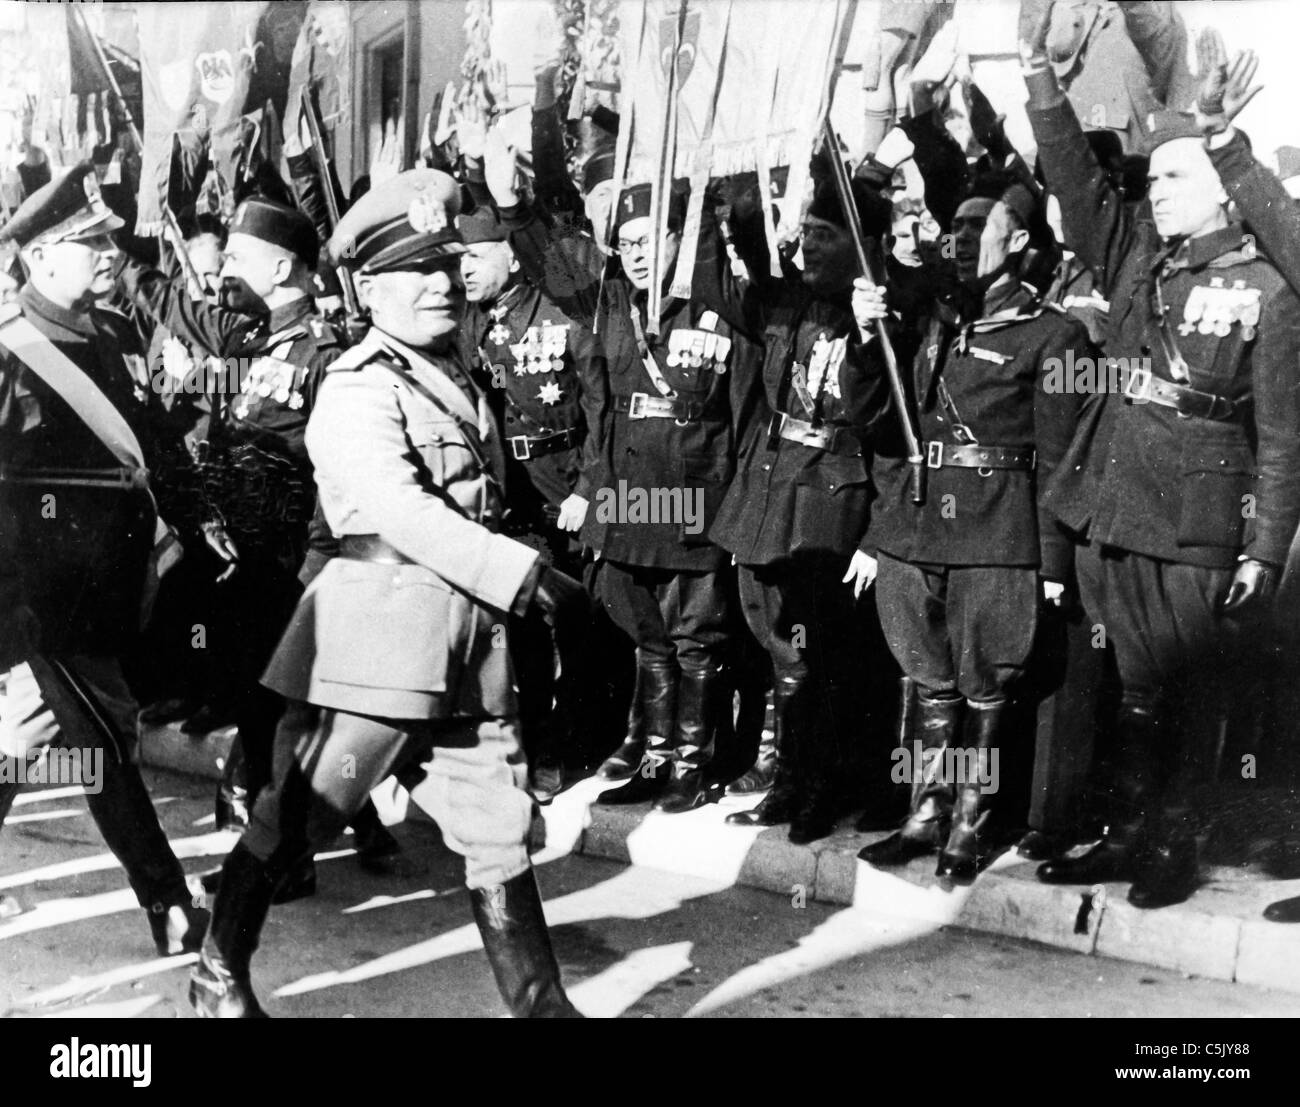 Benito Mussolini parade in front of his loyalists, 1940 Stock Photo - Alamy